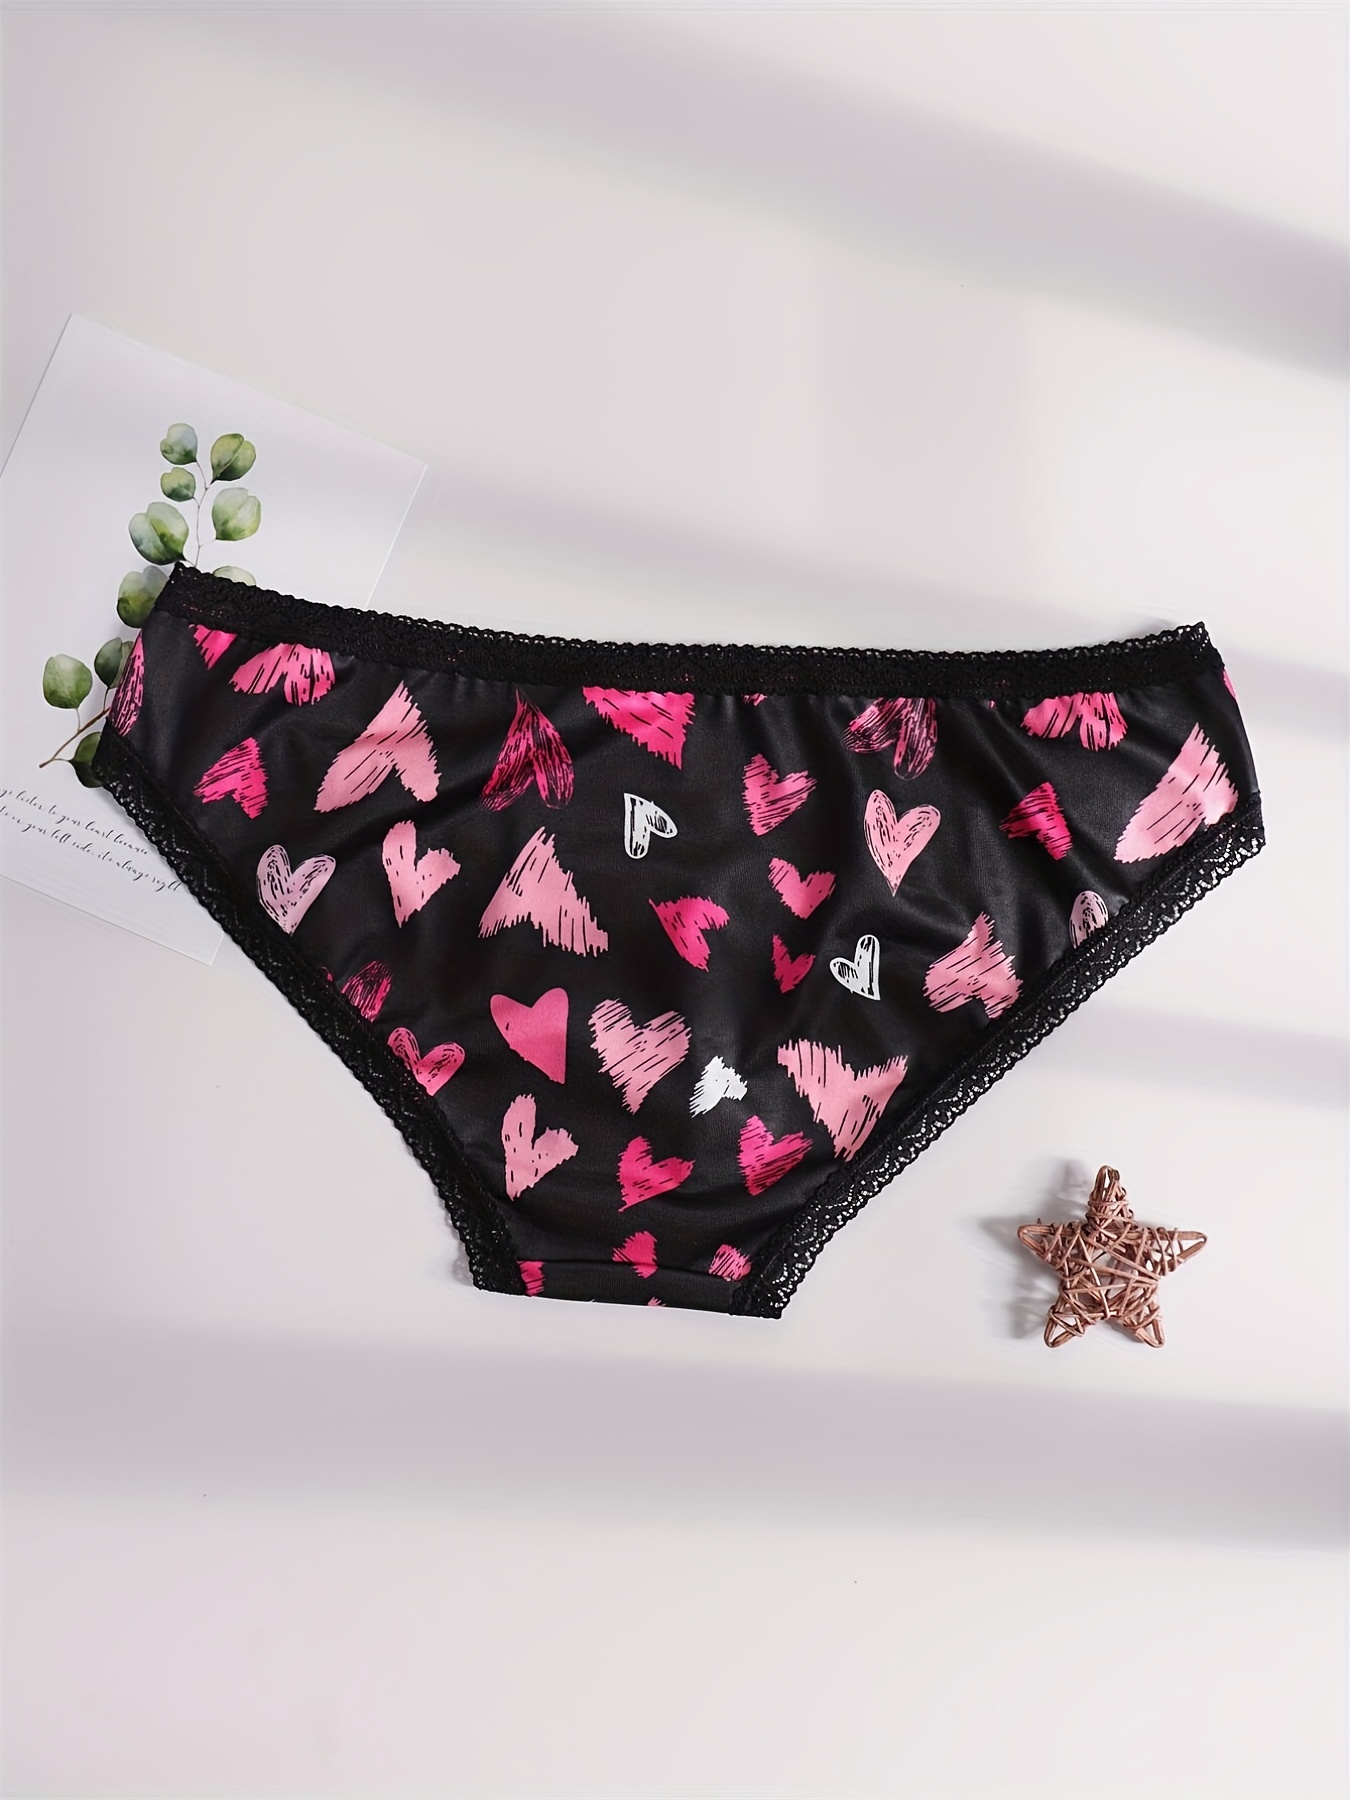 Buy Black/Pink Heart Print High Leg Cotton and Lace Knickers 4 Pack from  Next Ireland